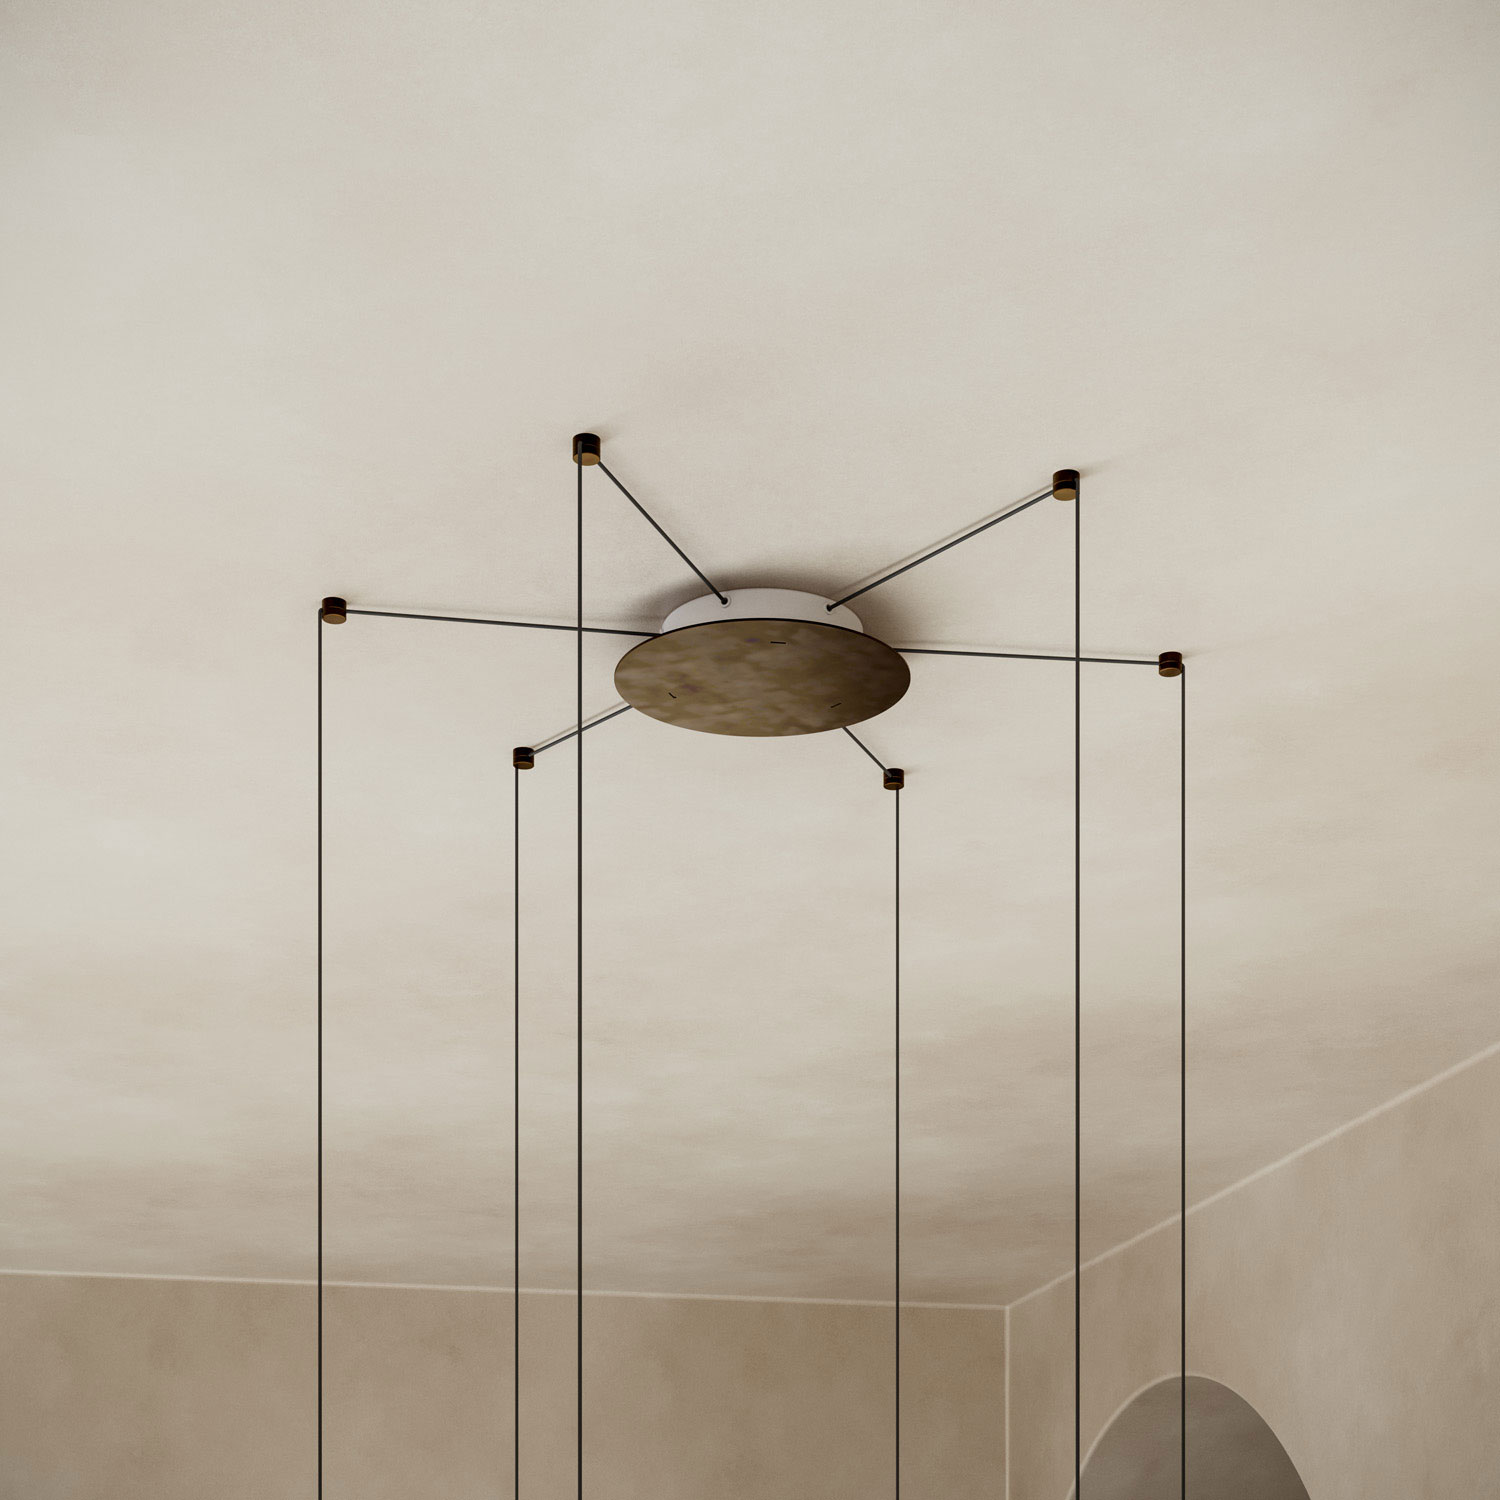 2-6 Lights radial canopy by Il Fanale